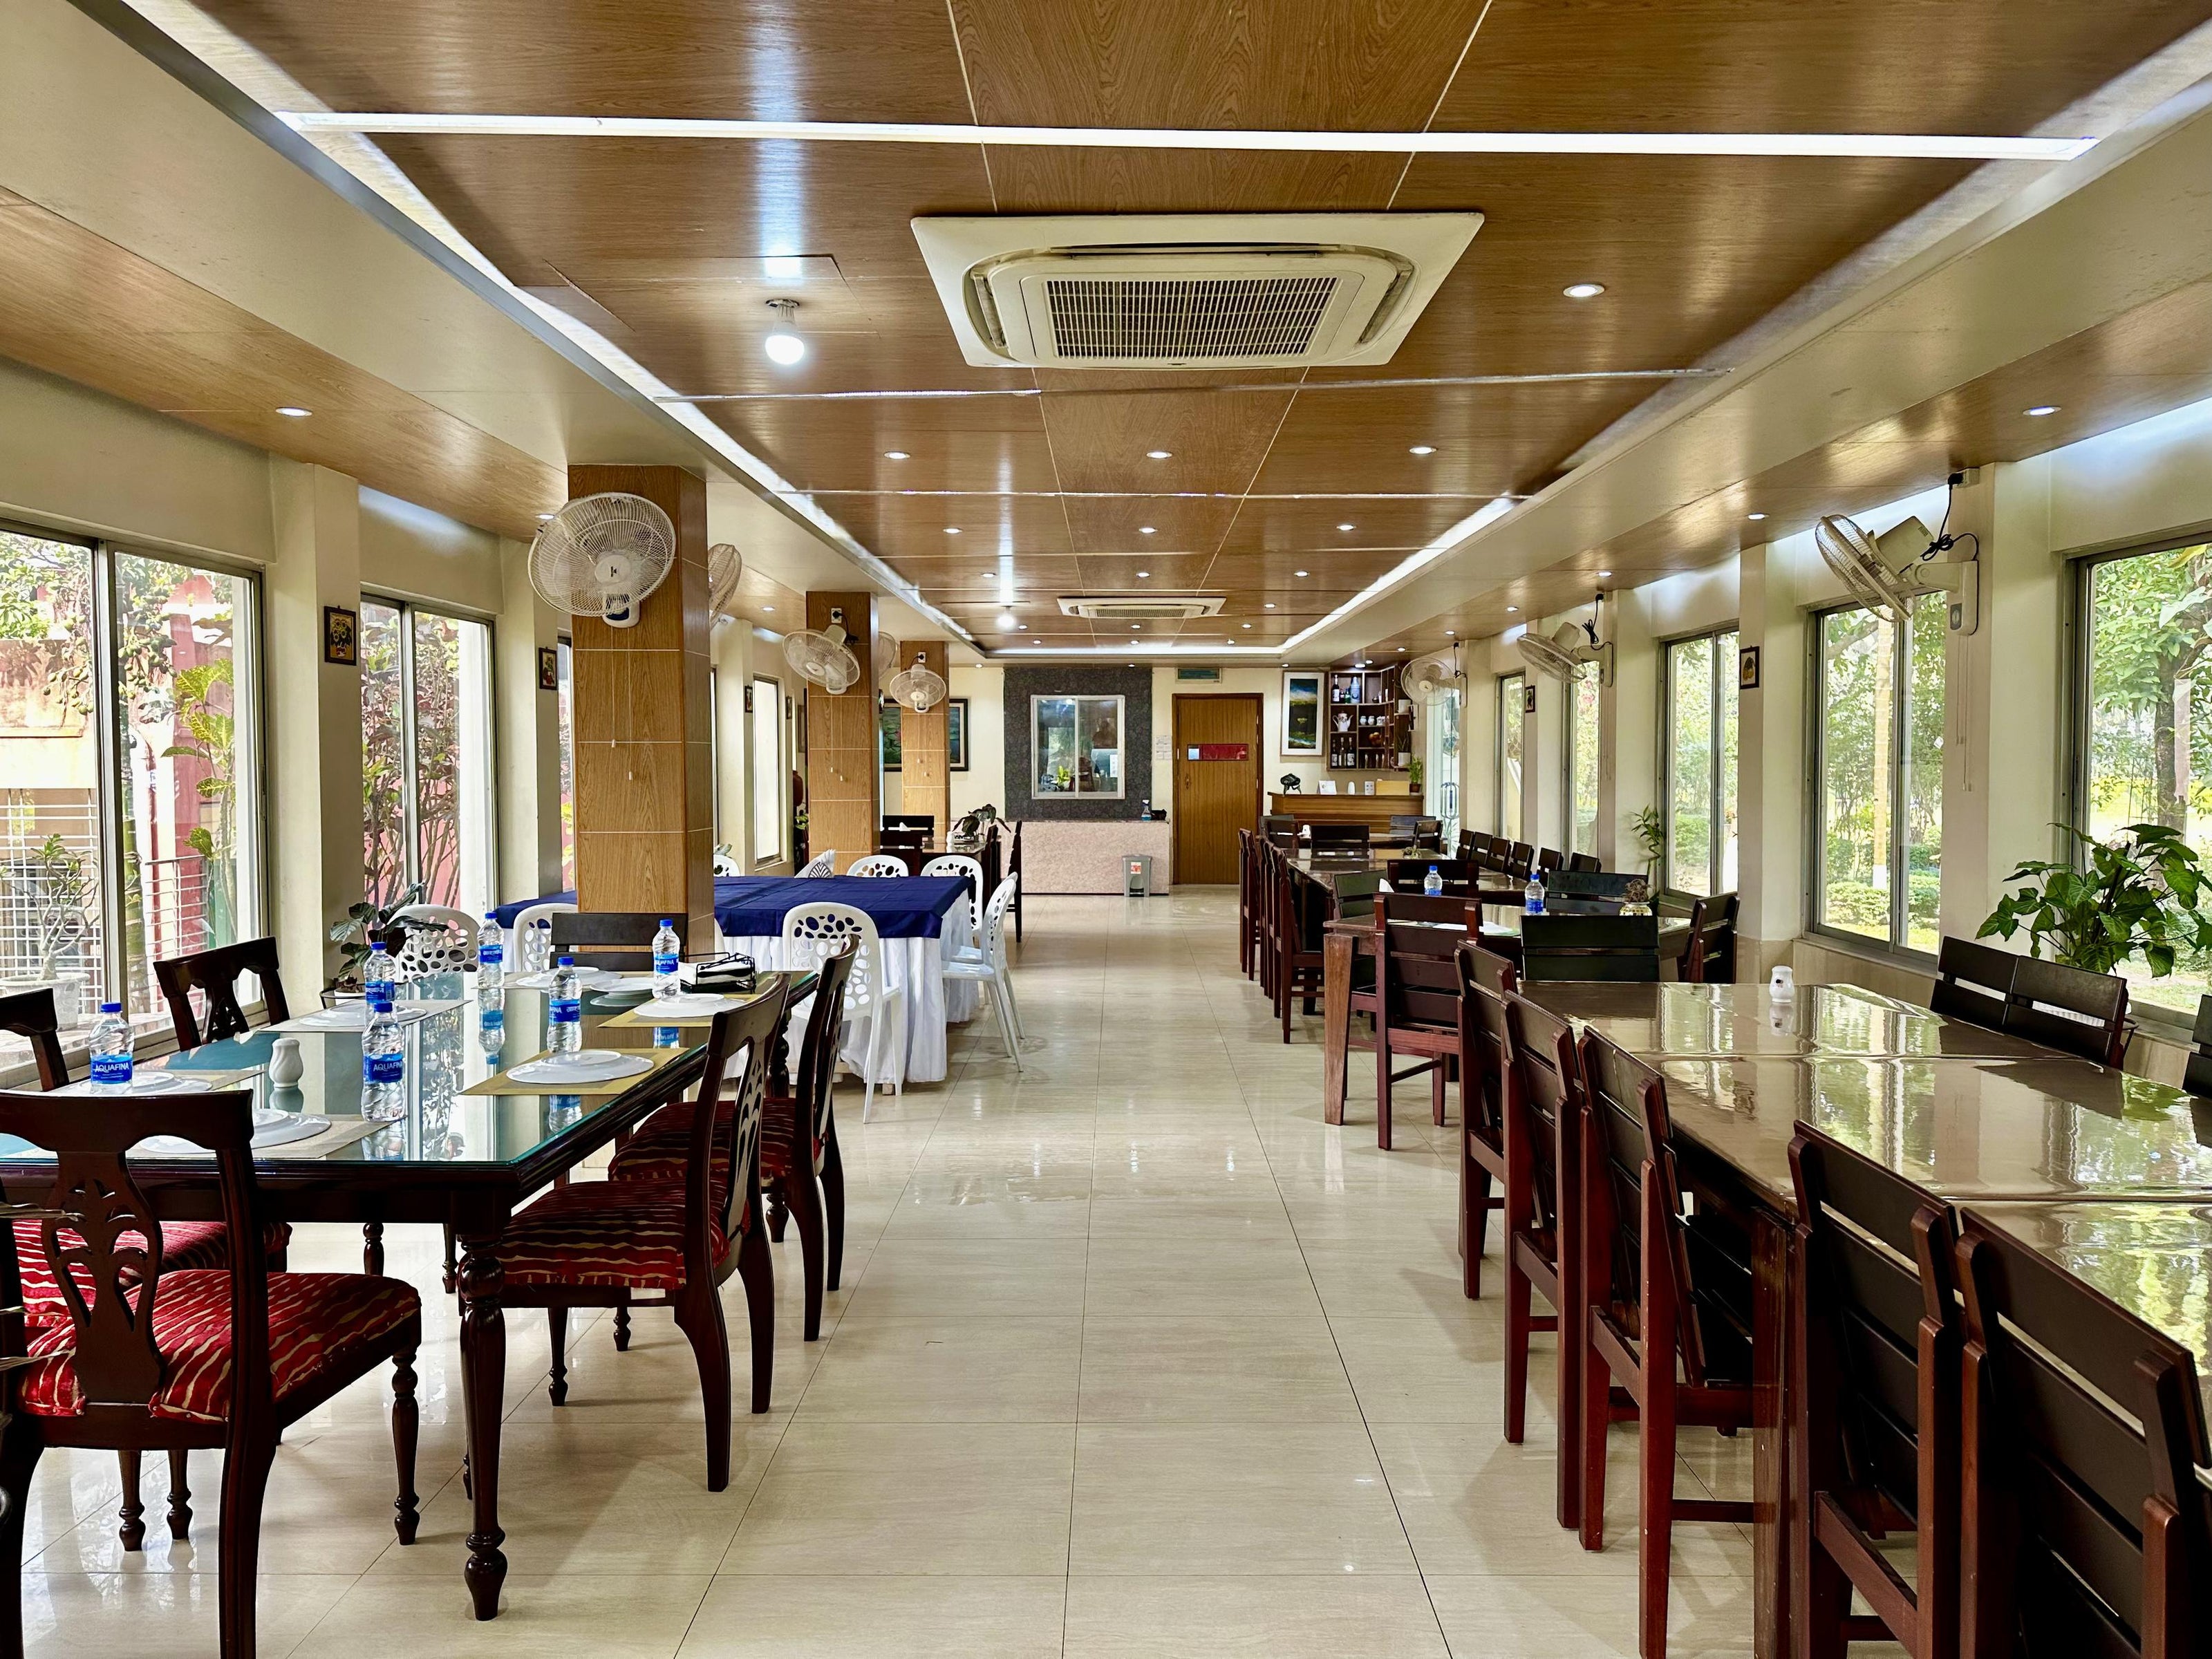 Elegant dining hall with large windows at Barnochata, a resort in Savar, offering a fine dining experience in a Dhaka hotel setting.